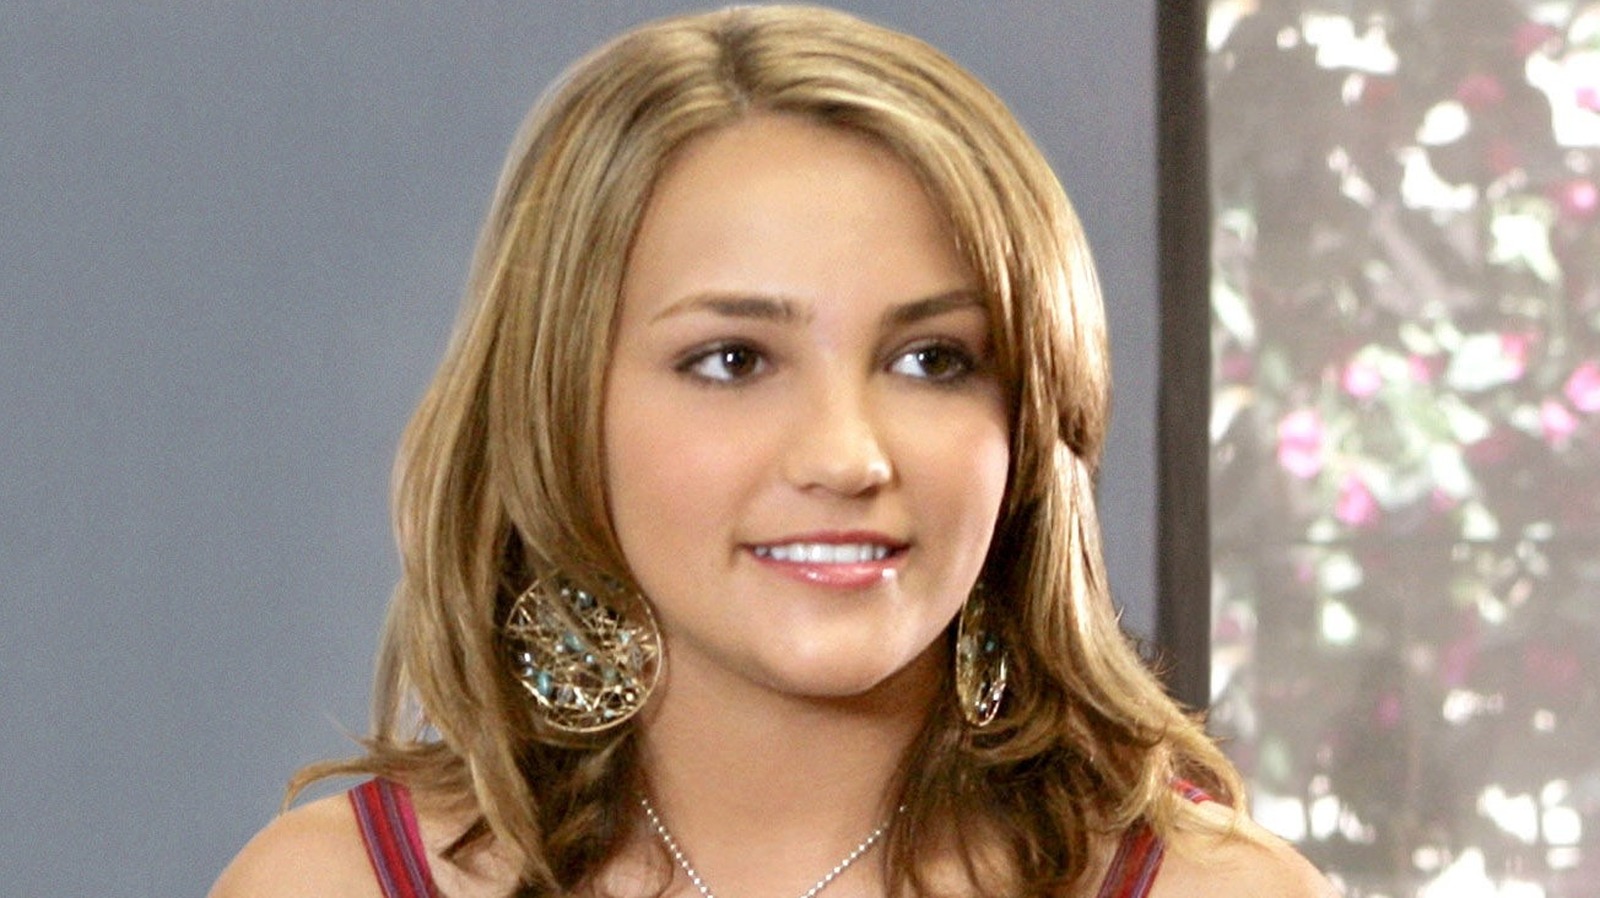 Here's What Jamie Lynn Spears Looks Like Today